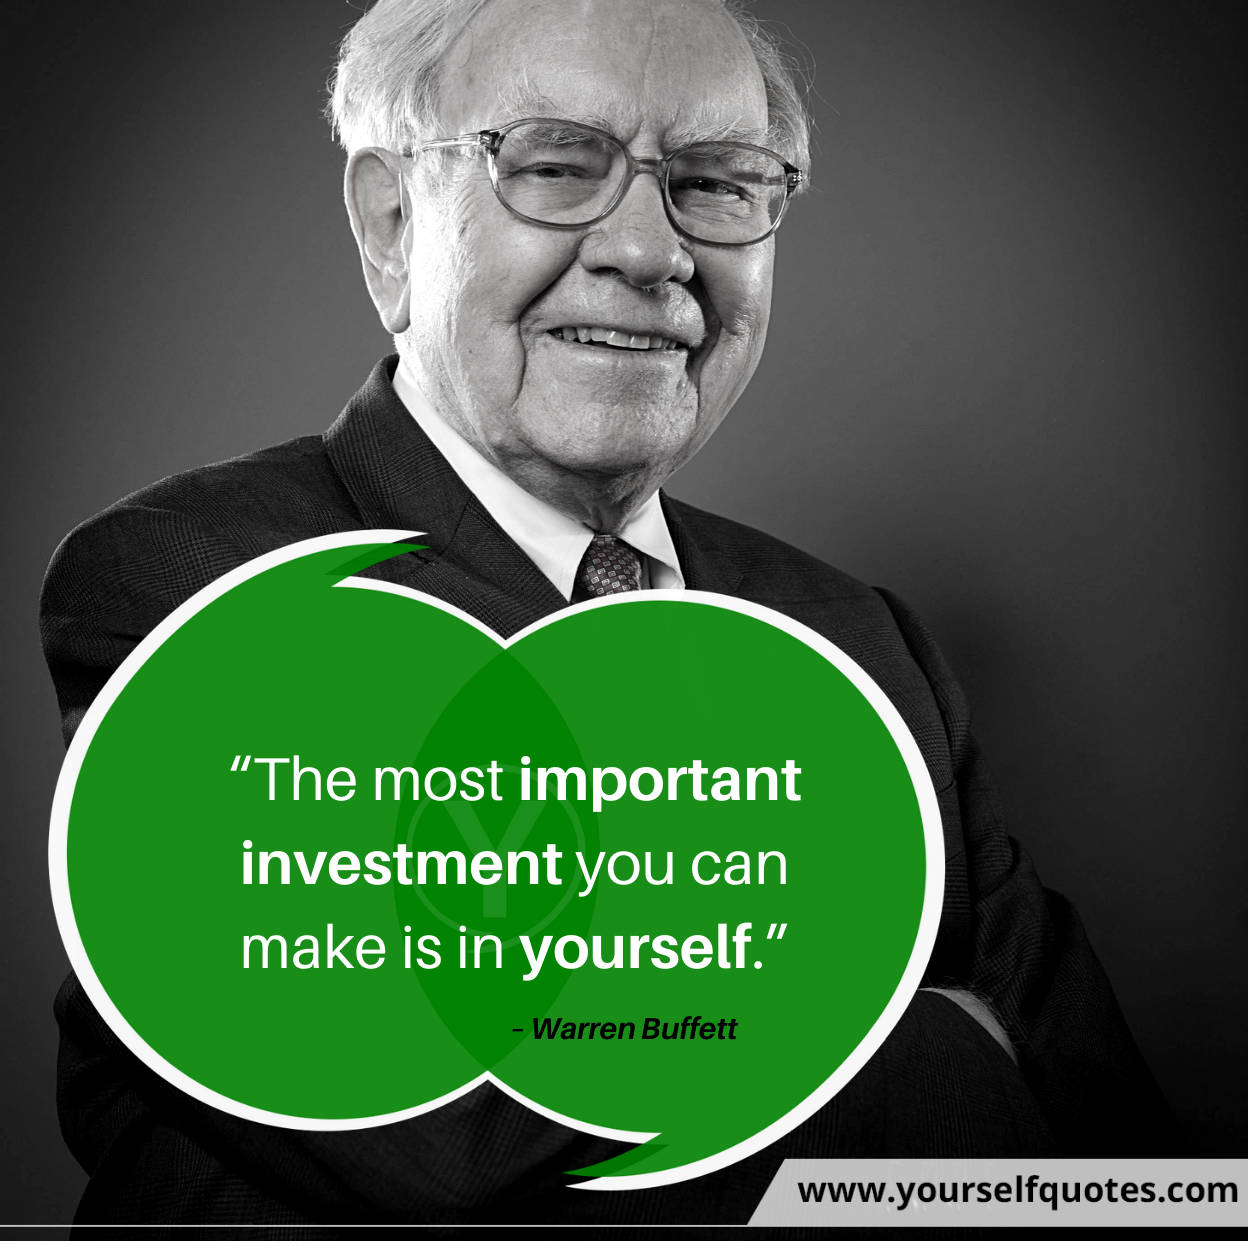 Warren Buffett Quotes On Business, Money, Investing That Will Inspire You A Richer Life